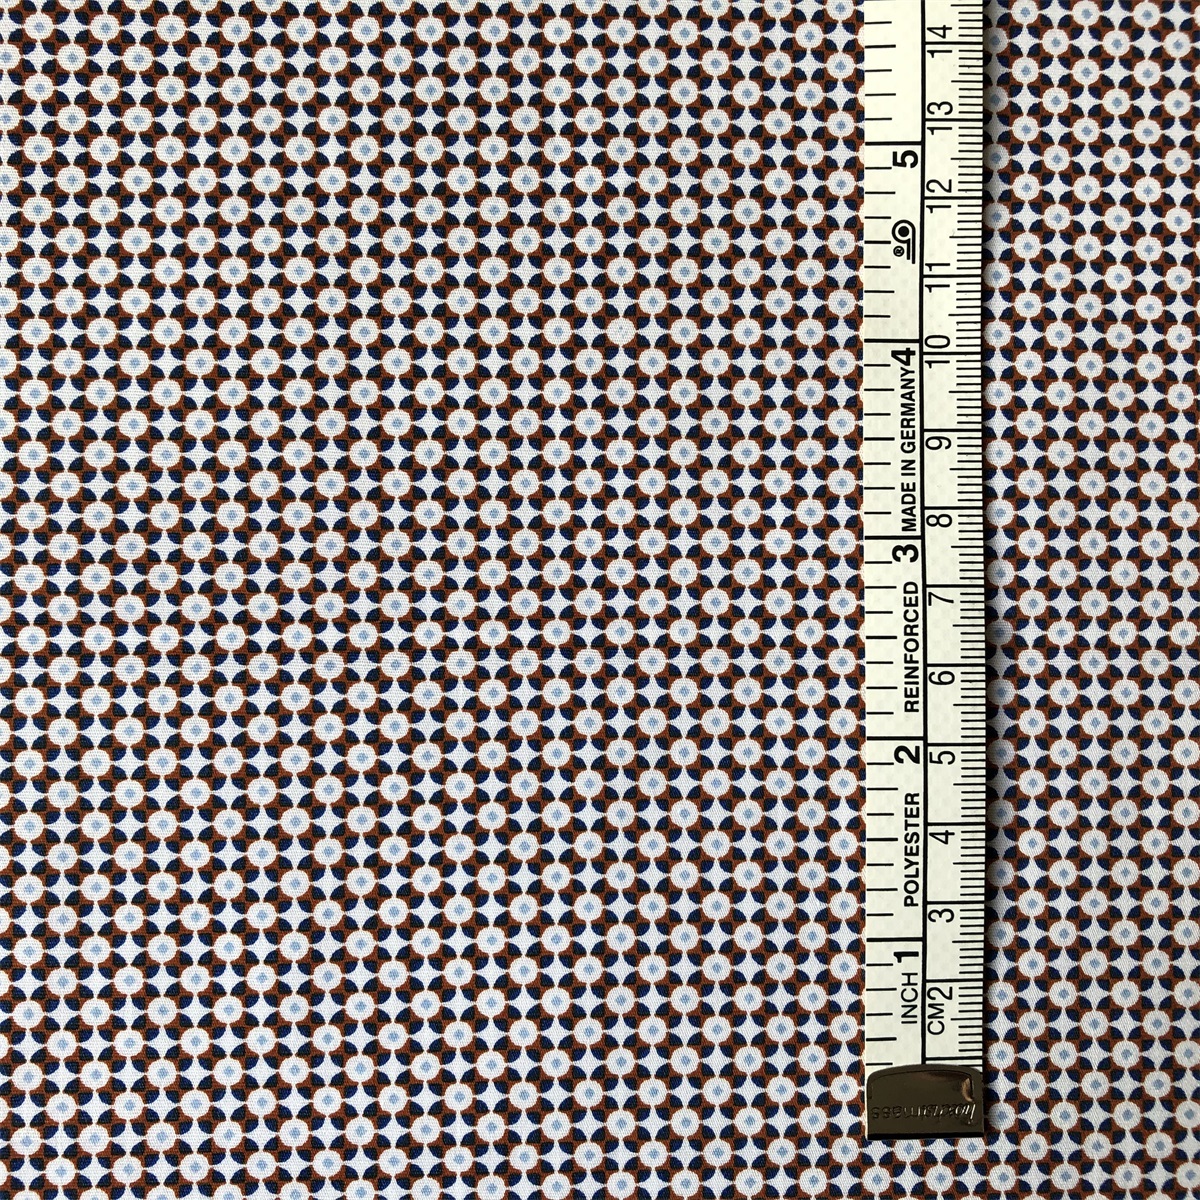 New fashionable pattern Spandex Fabric by compact yarn 98% cotton 2% spandex poplin printed shirts woven stretchy fabric